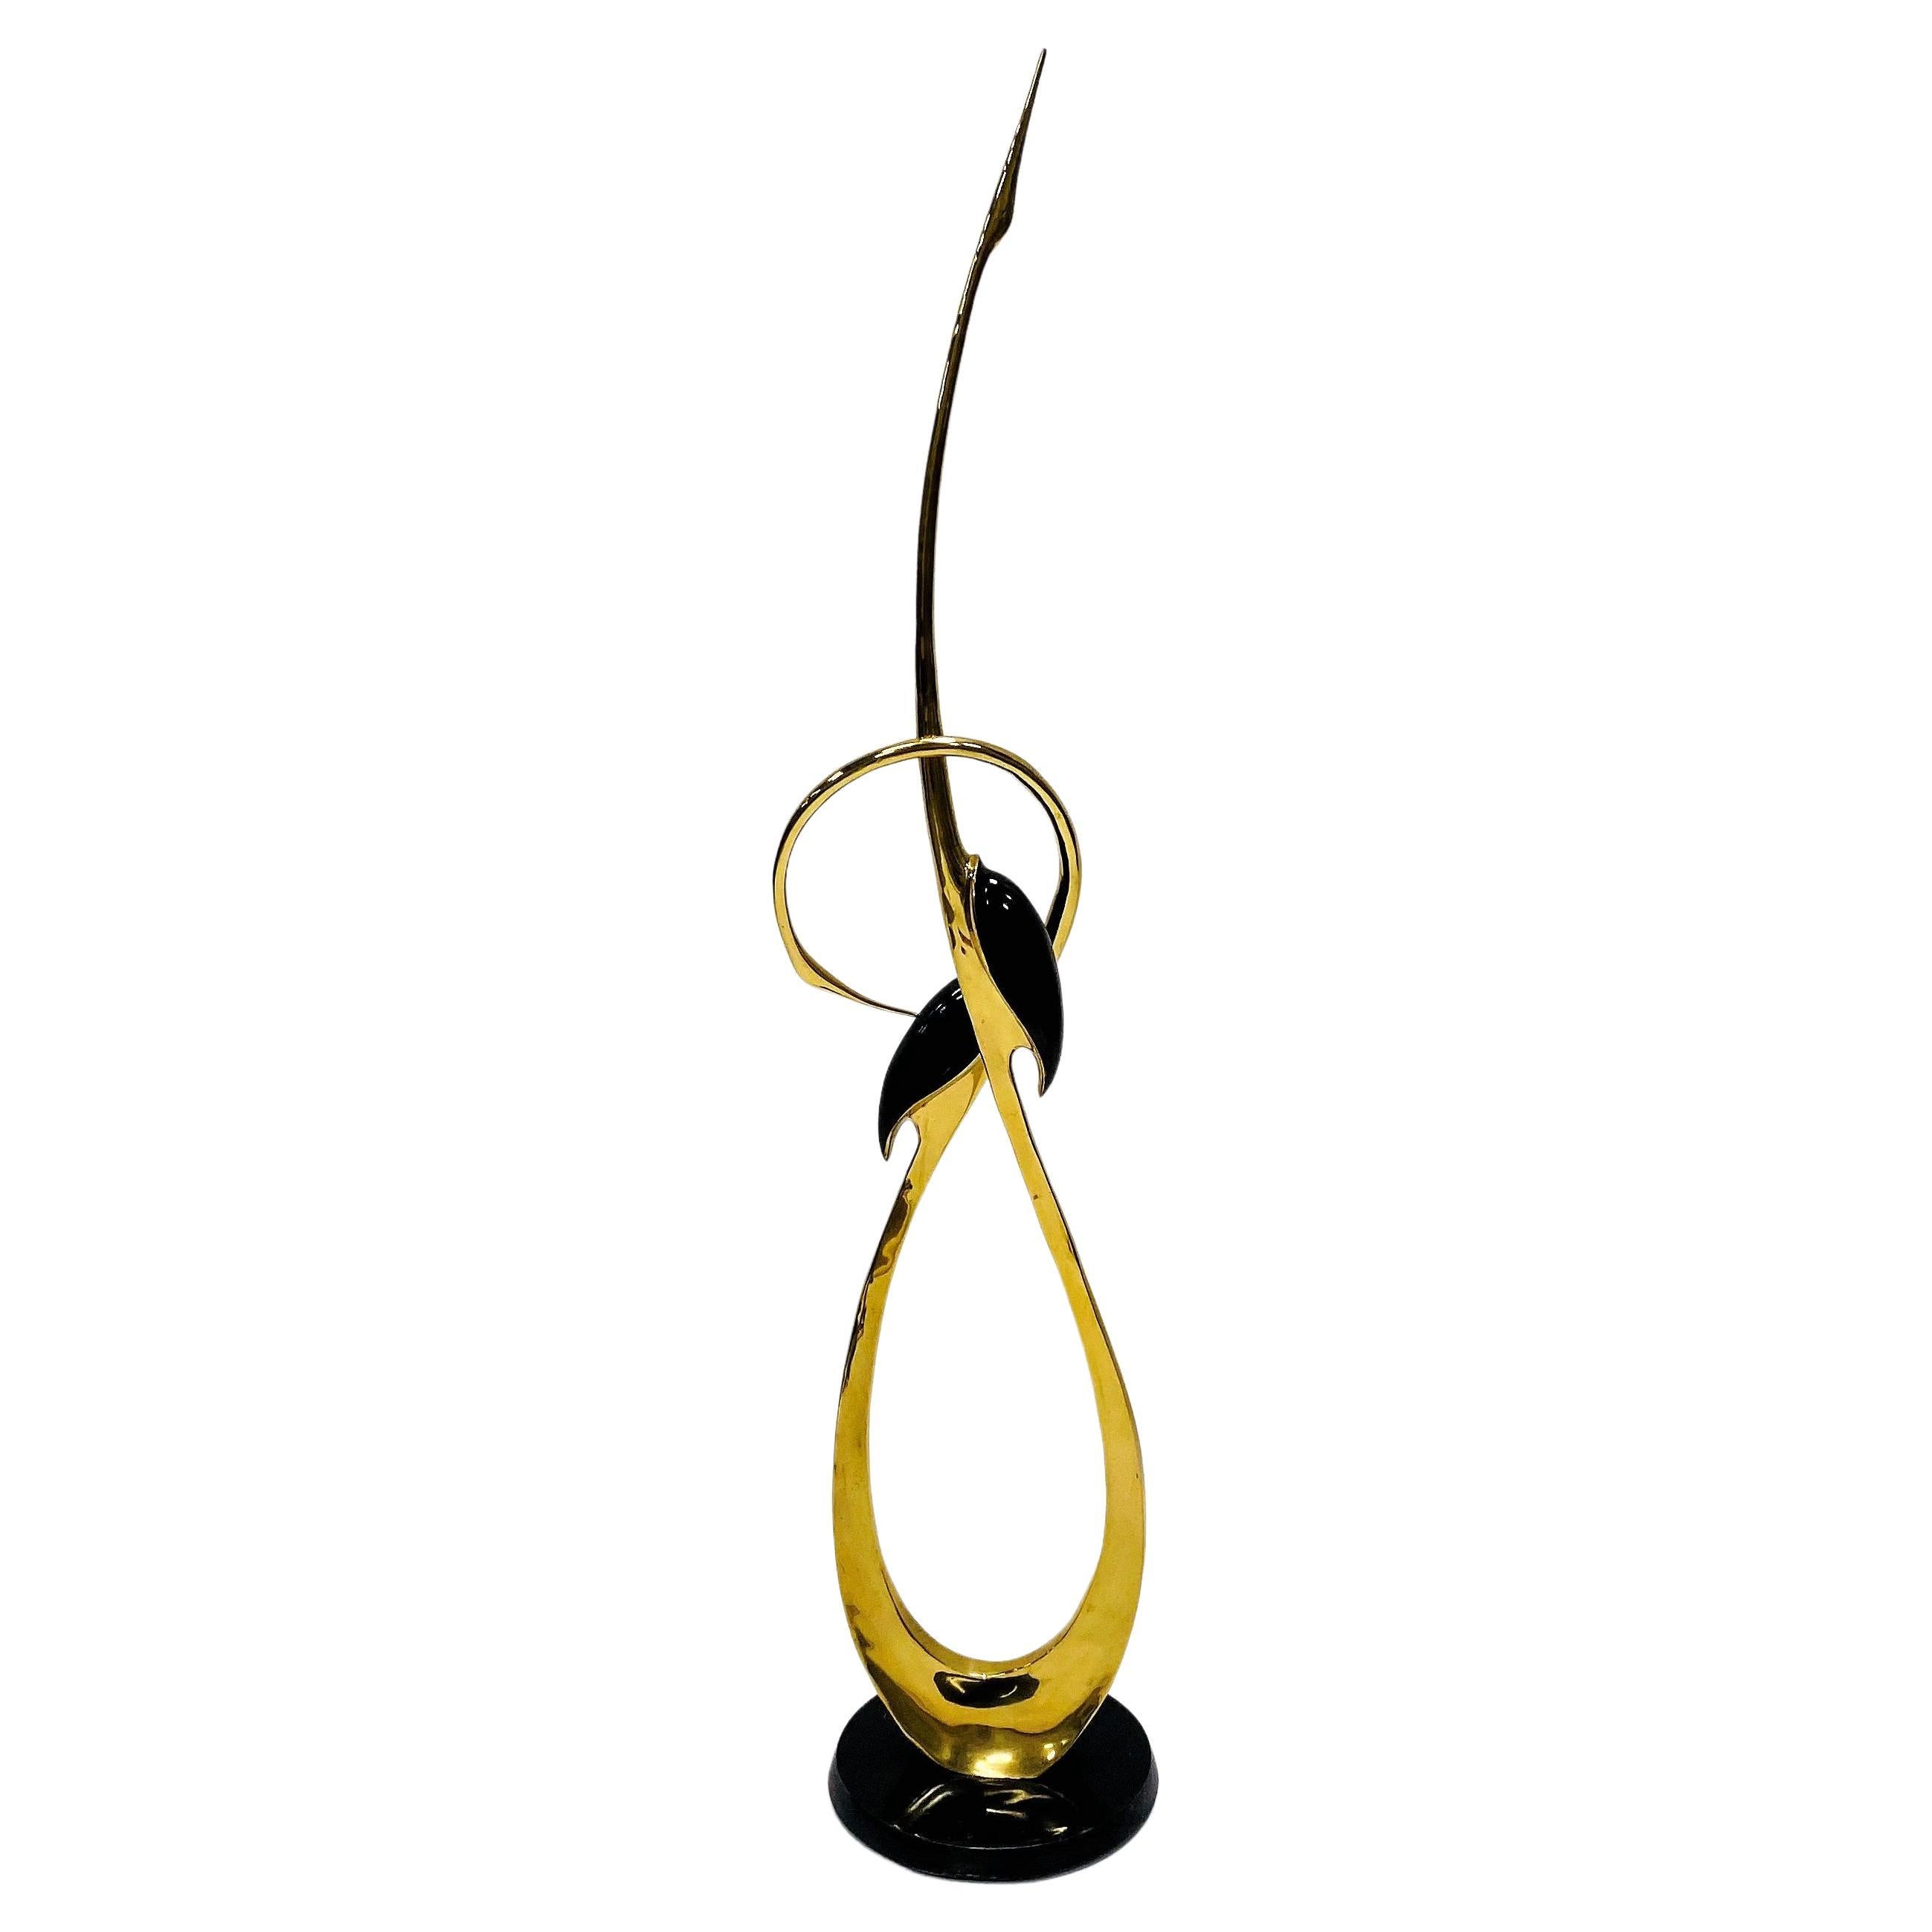 Tall Brass Entwined Cranes Sculpture by Boris Lovet Lorski For Sale